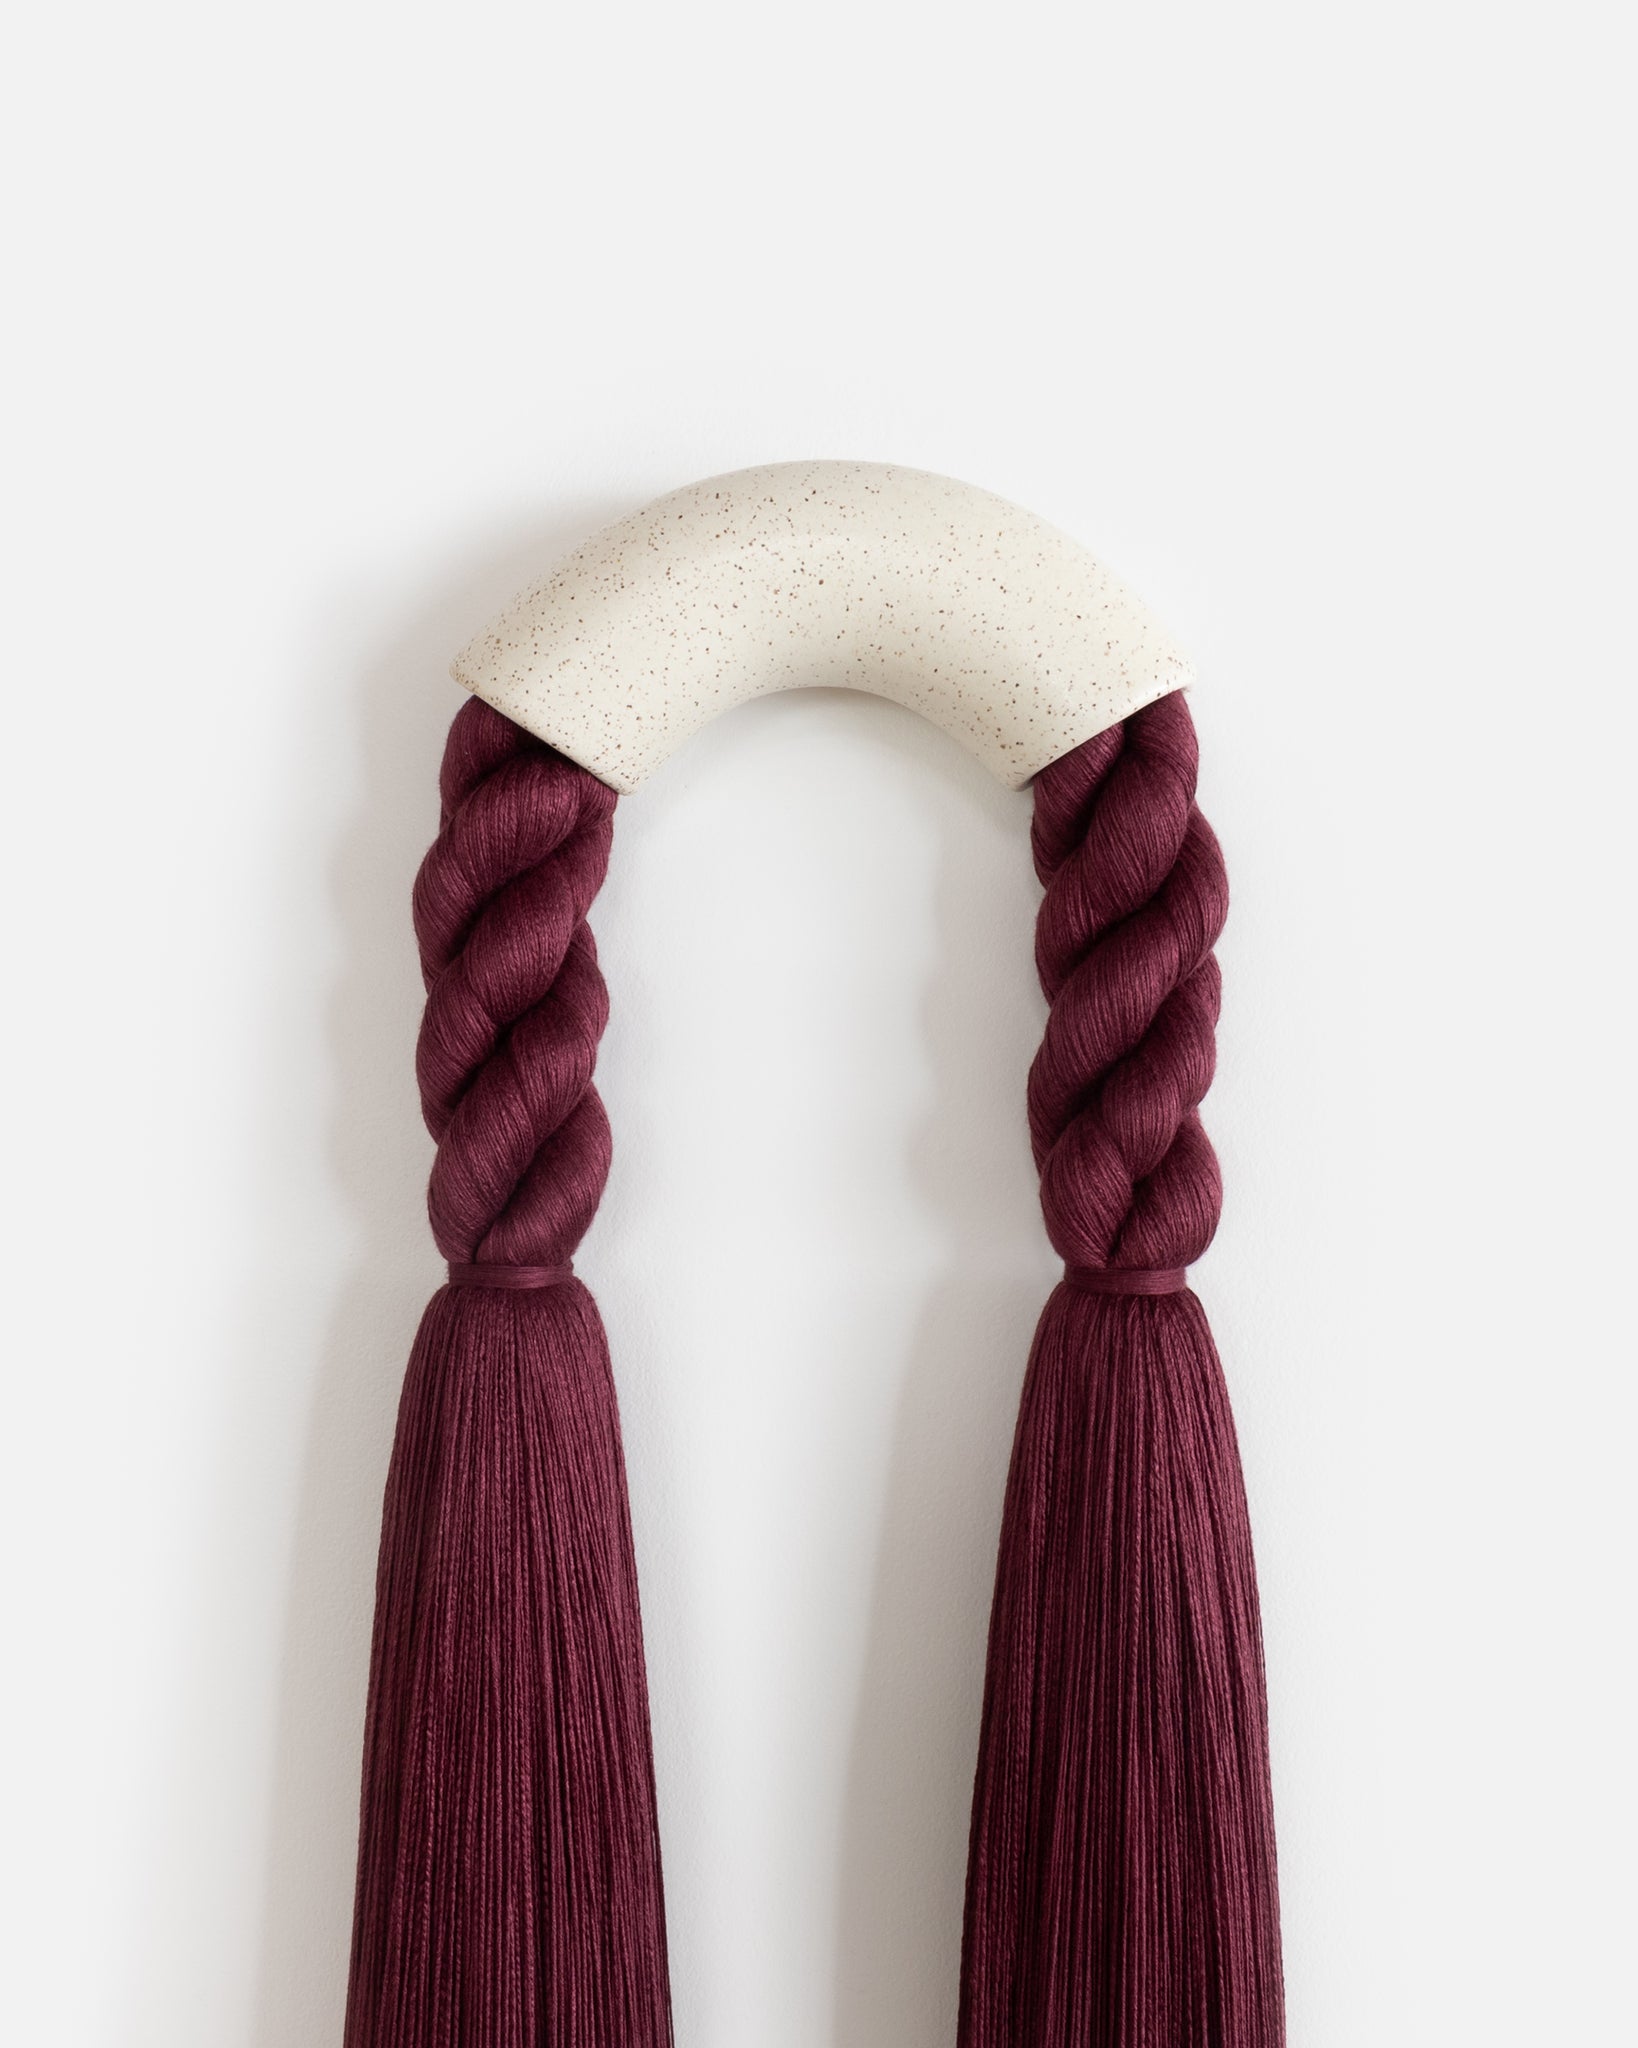 Large Off-White Ceramic Semi Arch (Maroon Rope)